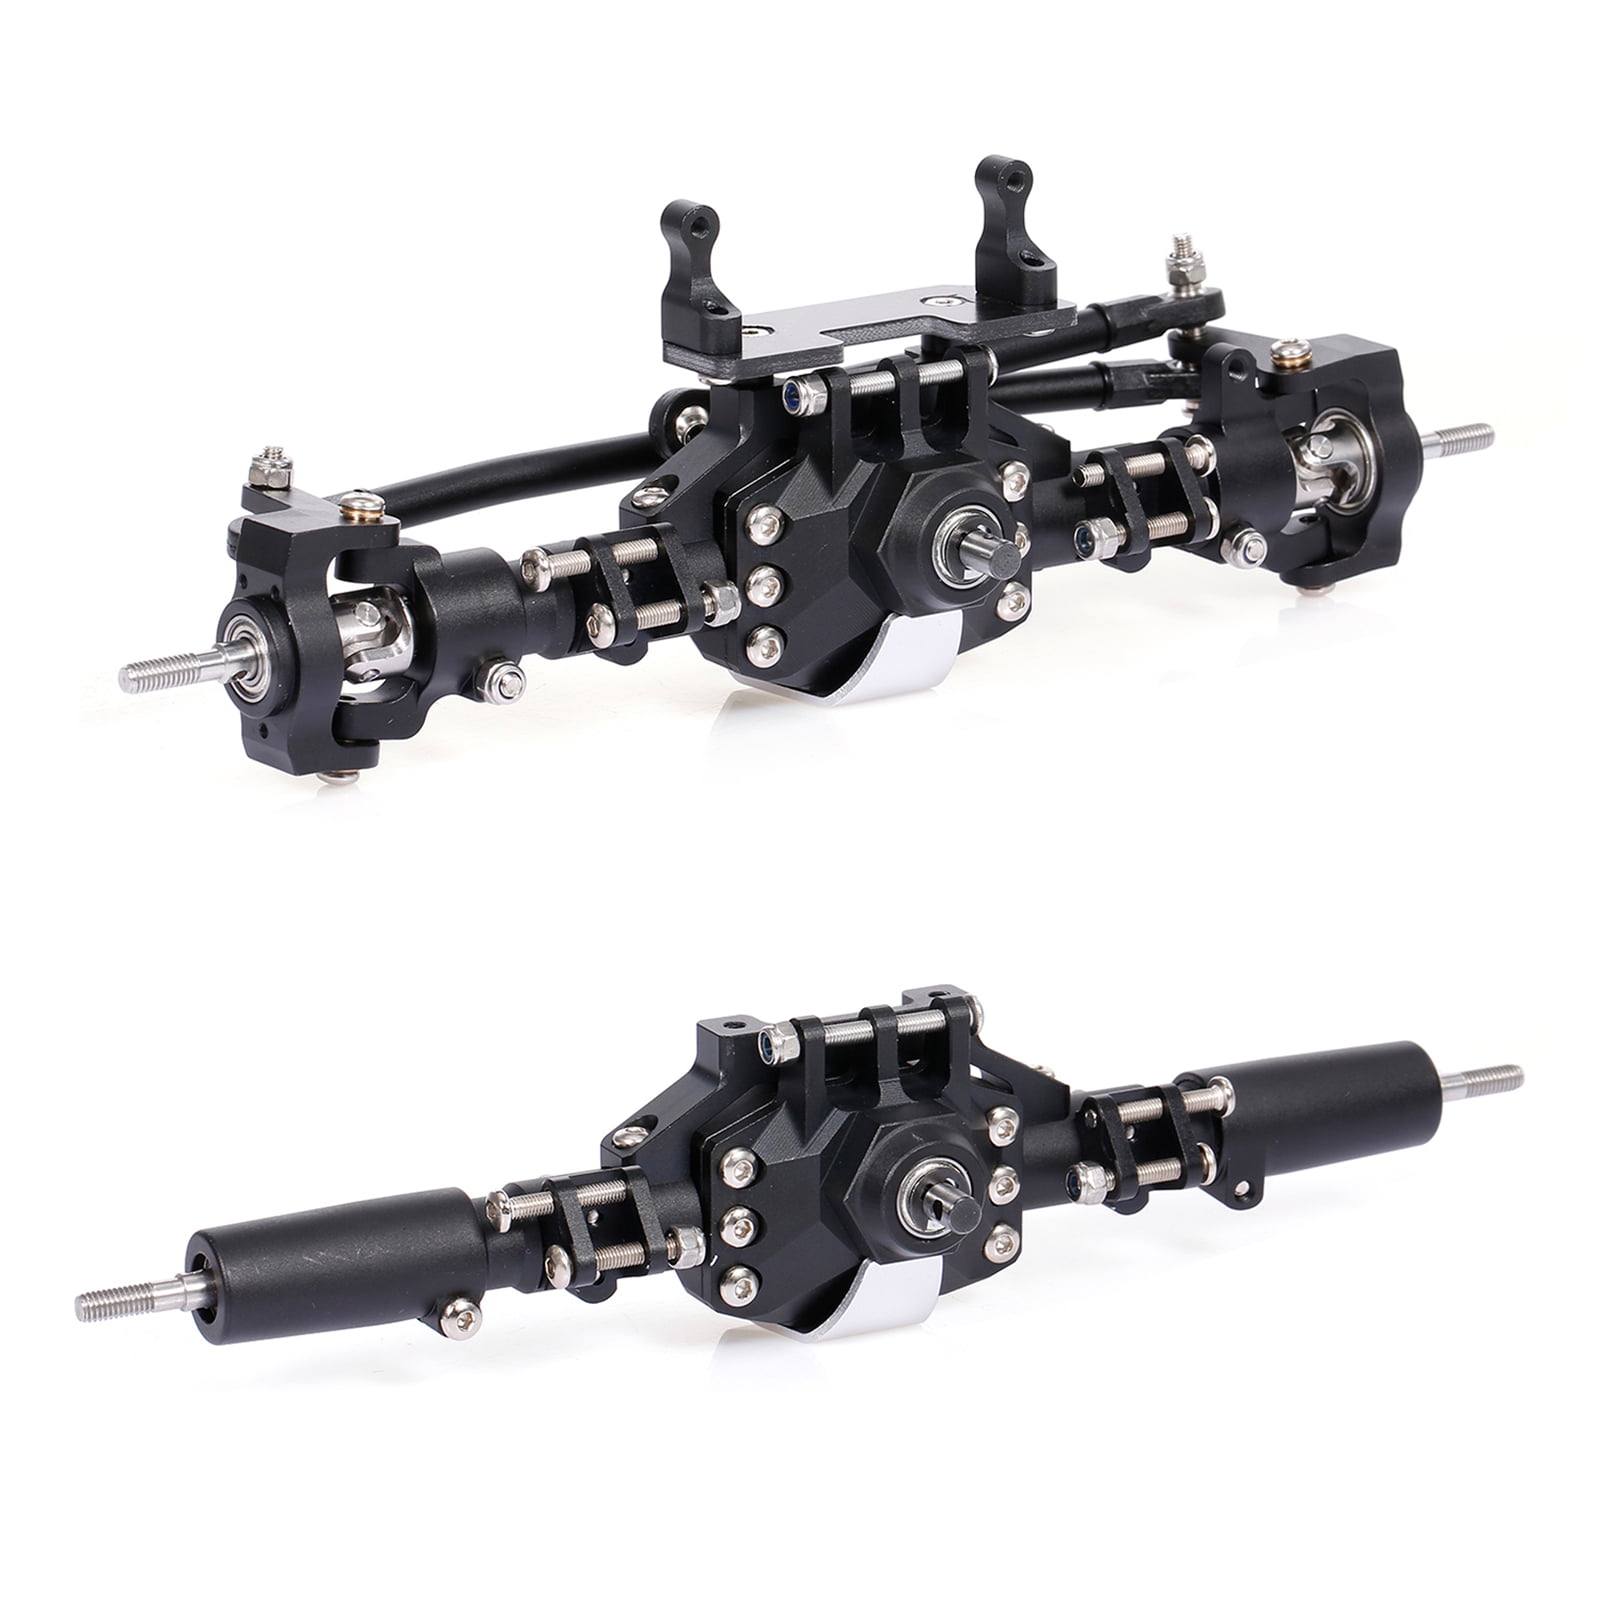 1pc Alloy Front & Rear Axle Housing for Axial SCX10 1/10 RC Crawler Car New 